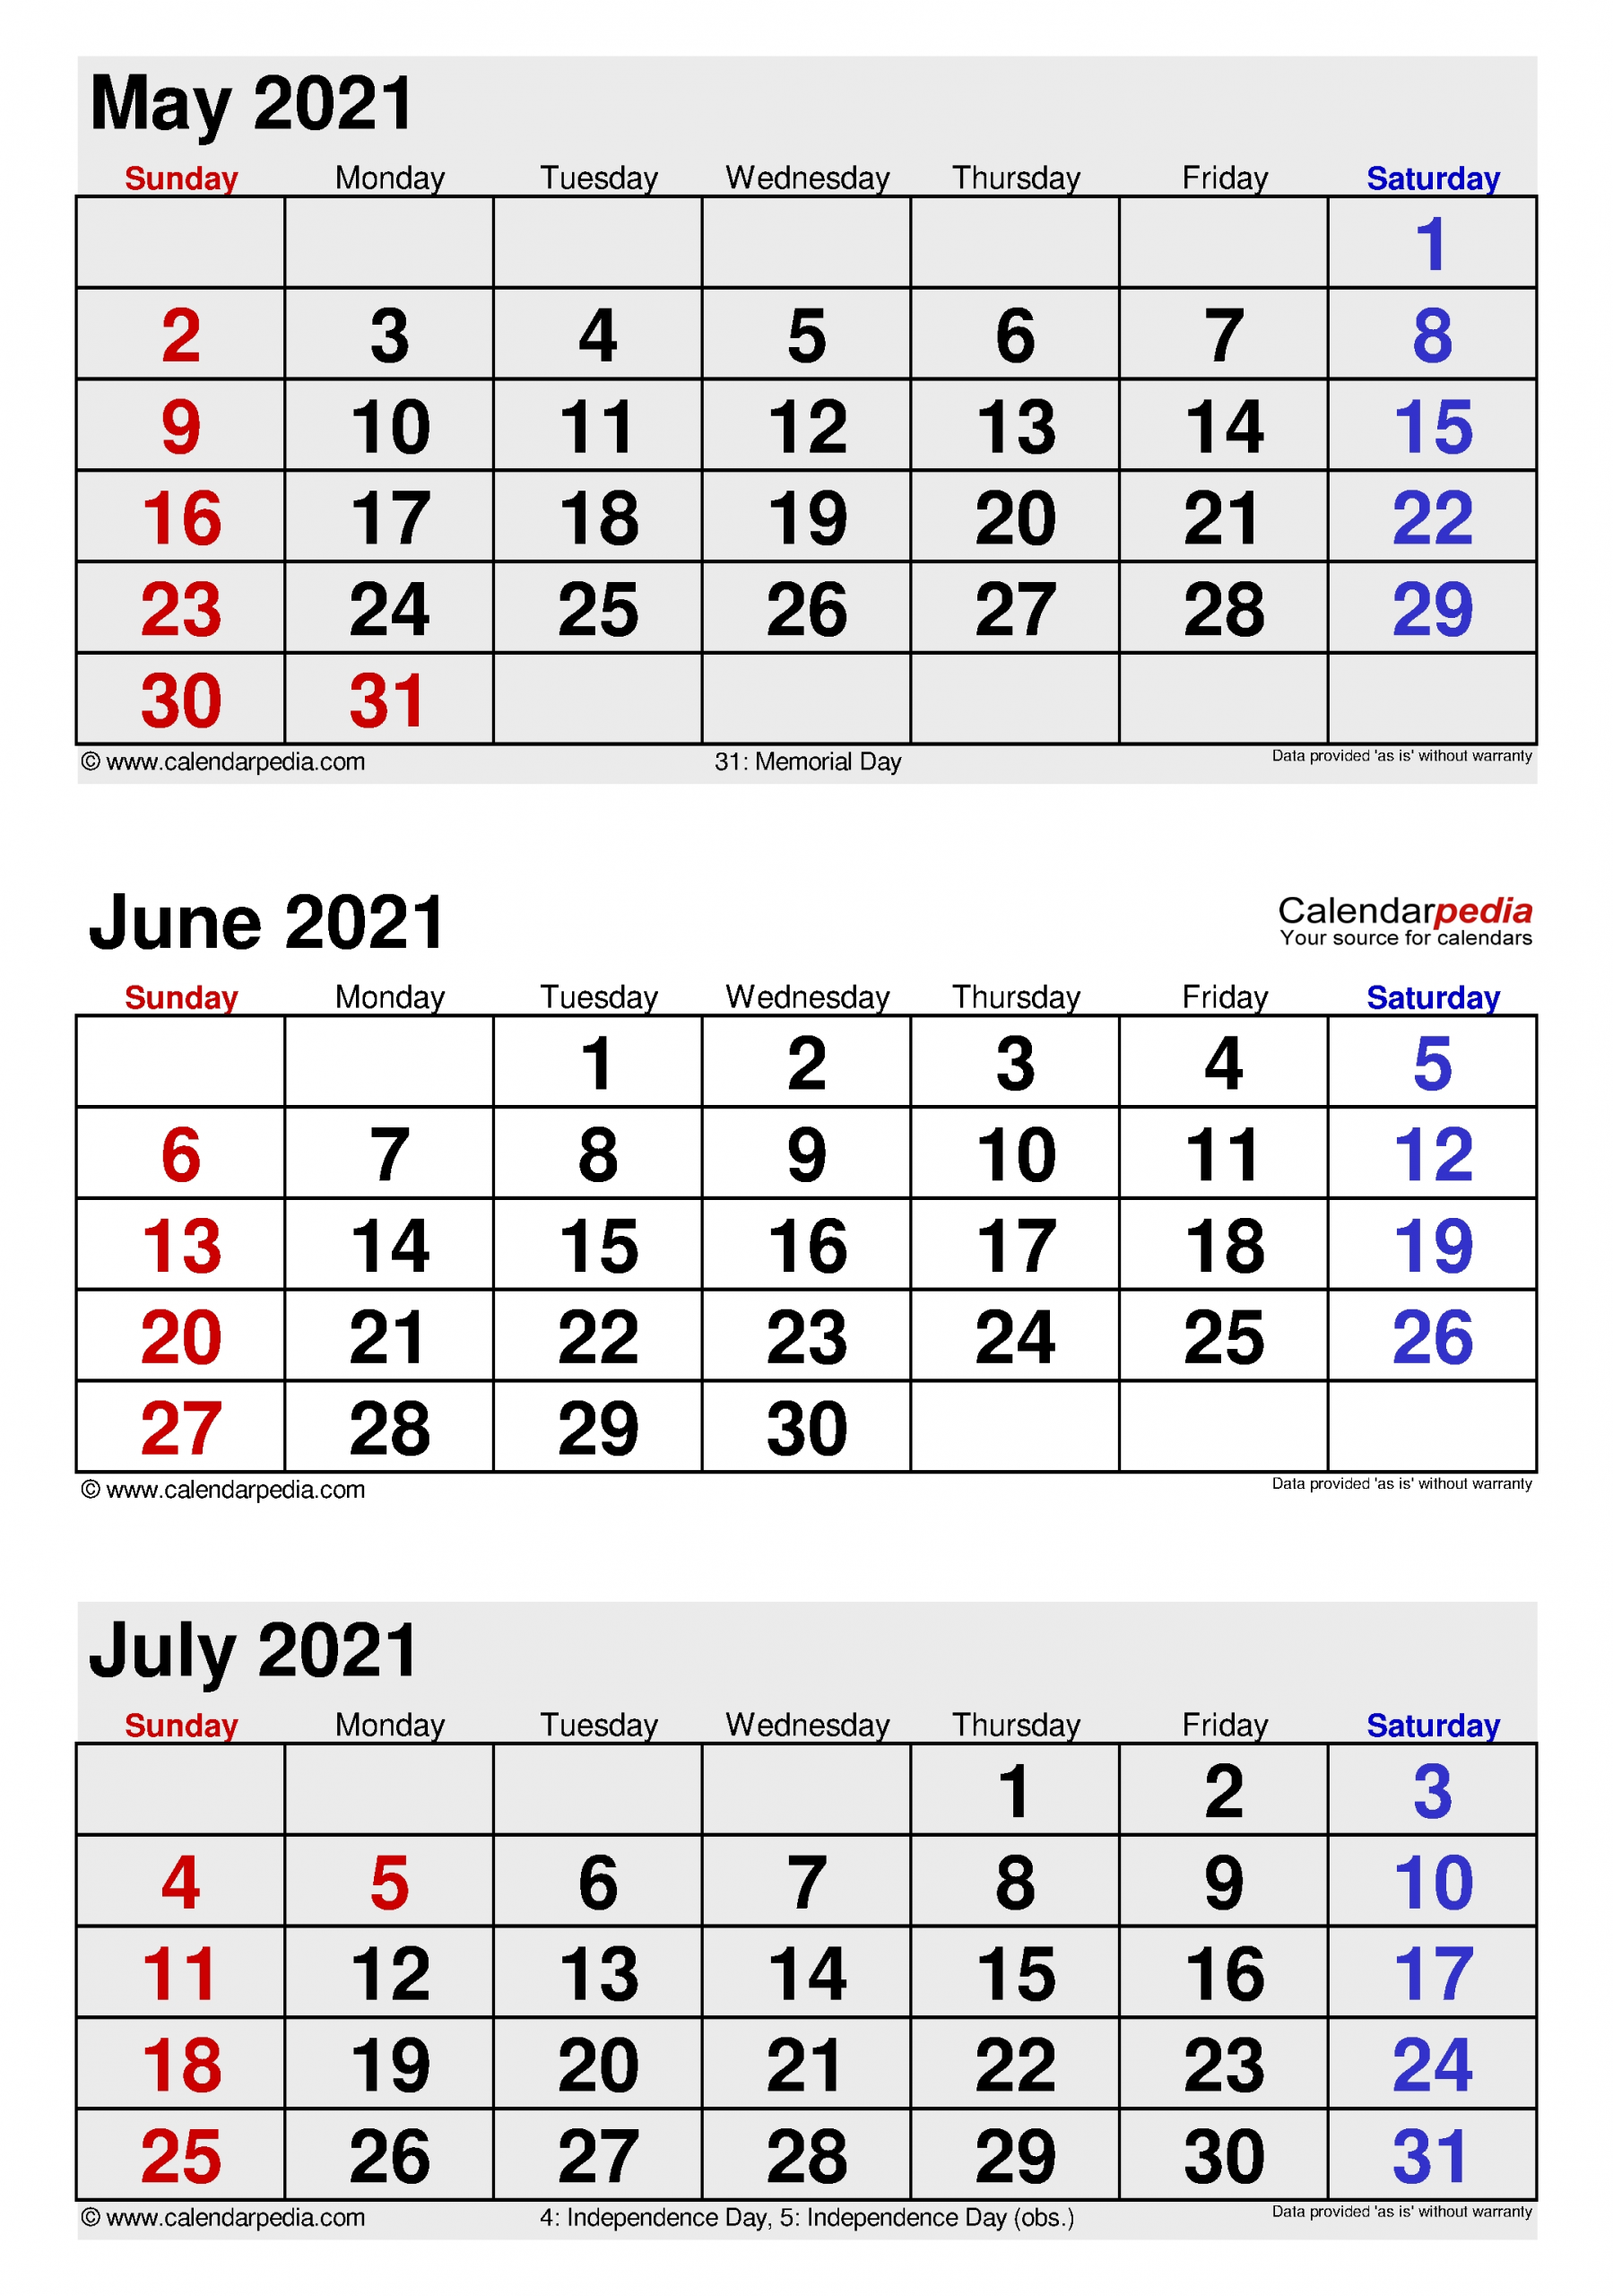 June 2021 Calendar | Templates For Word, Excel And Pdf